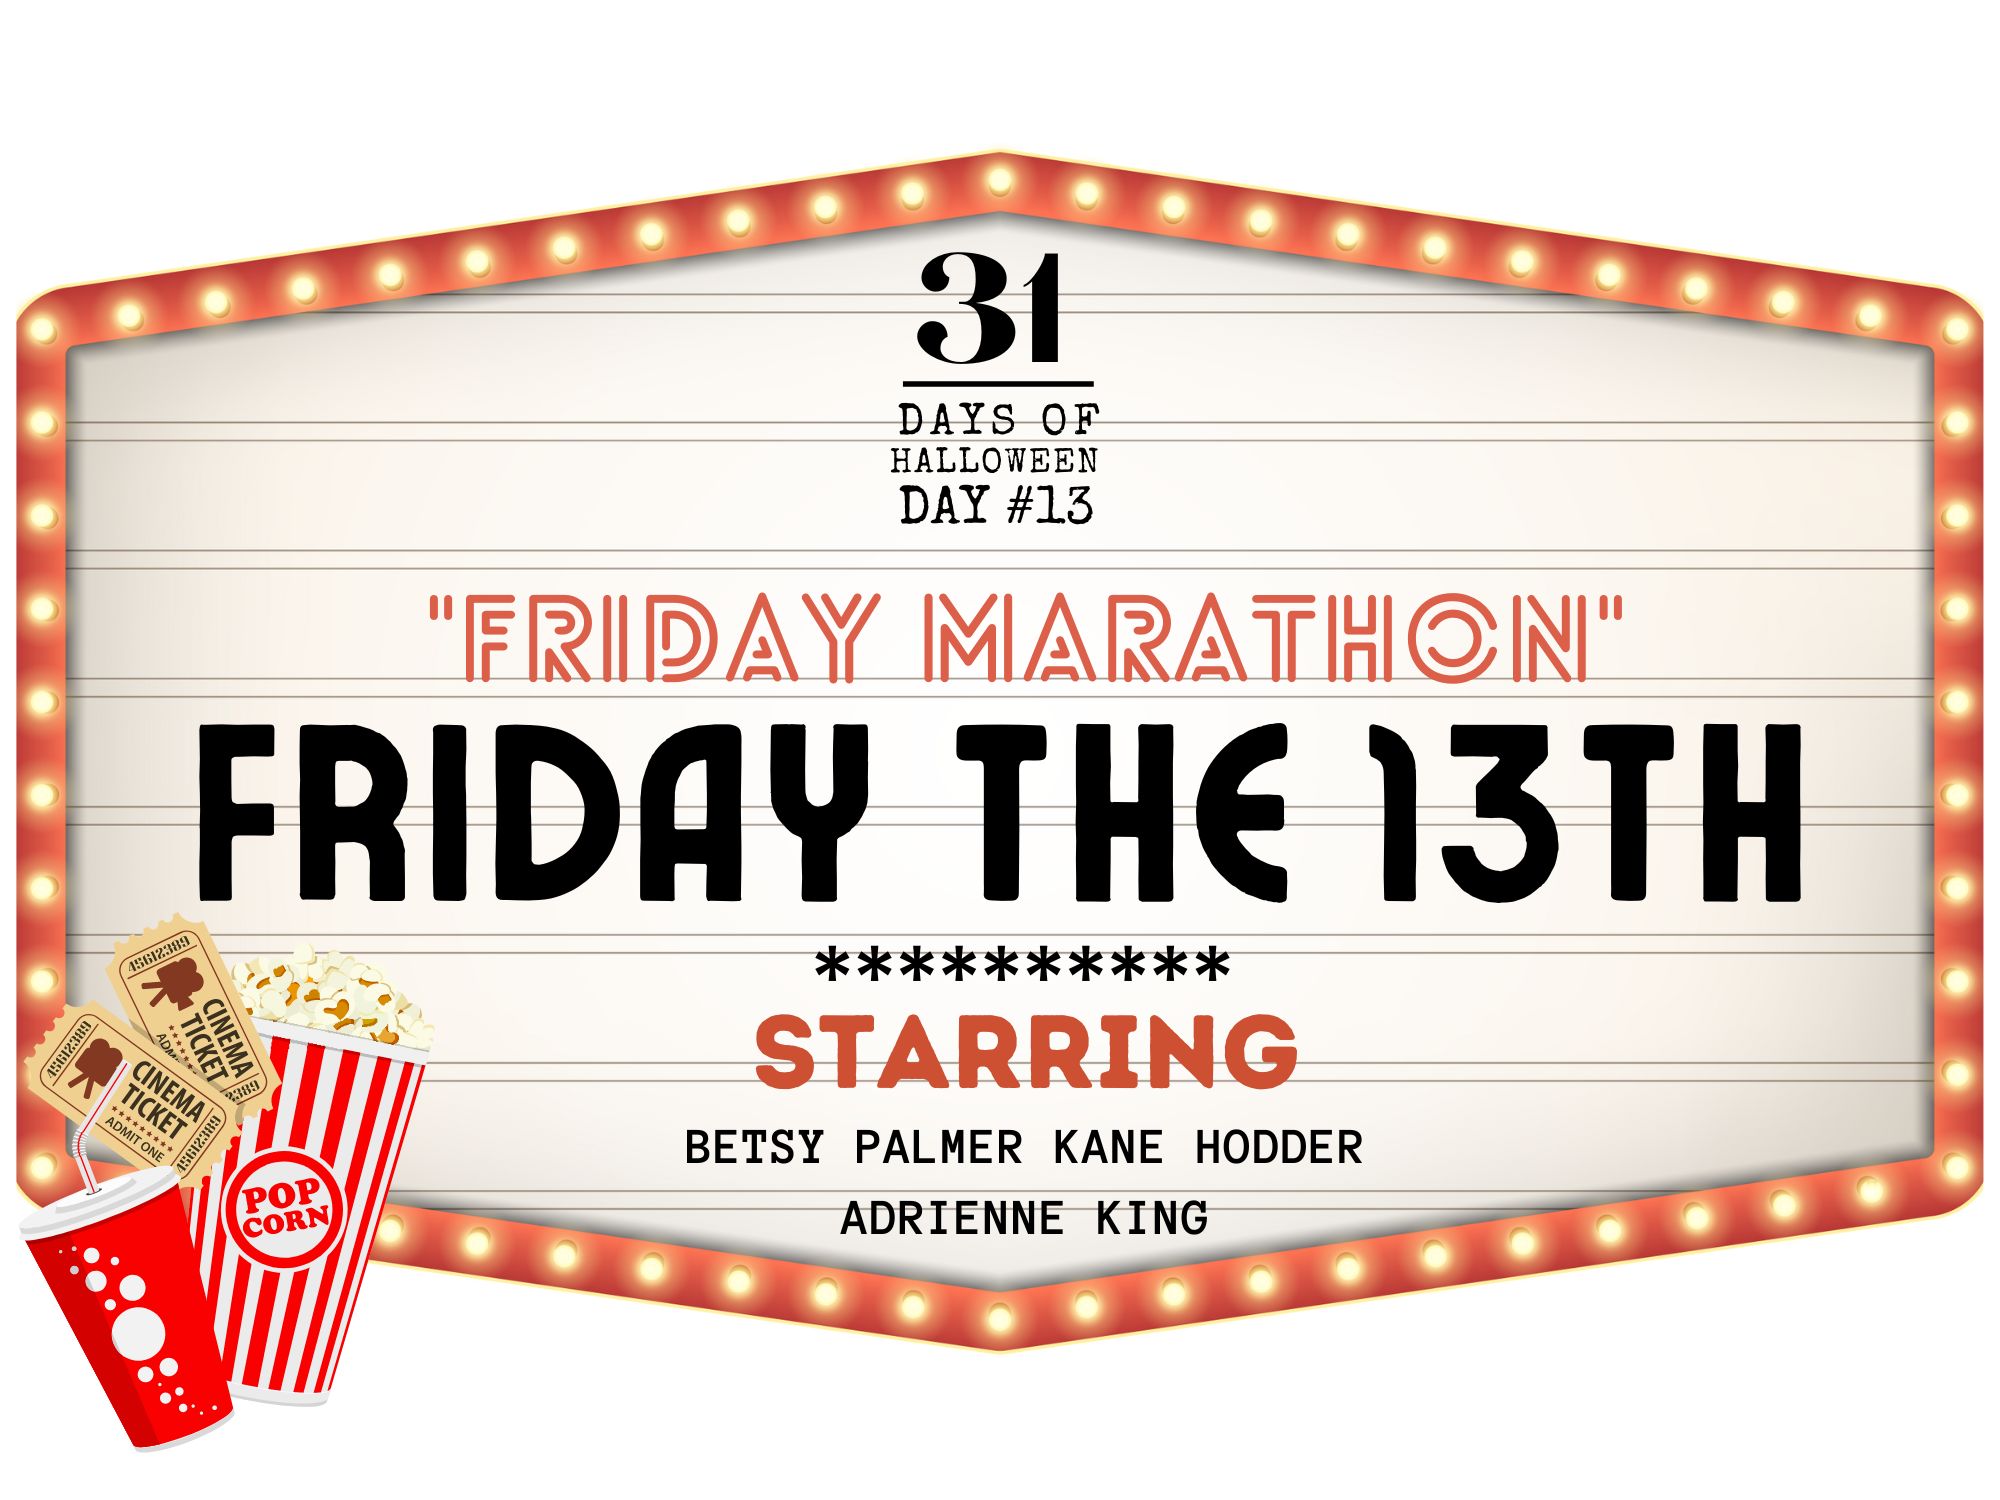 Friday the 13th movie marathon and new Crystal Lake series update!